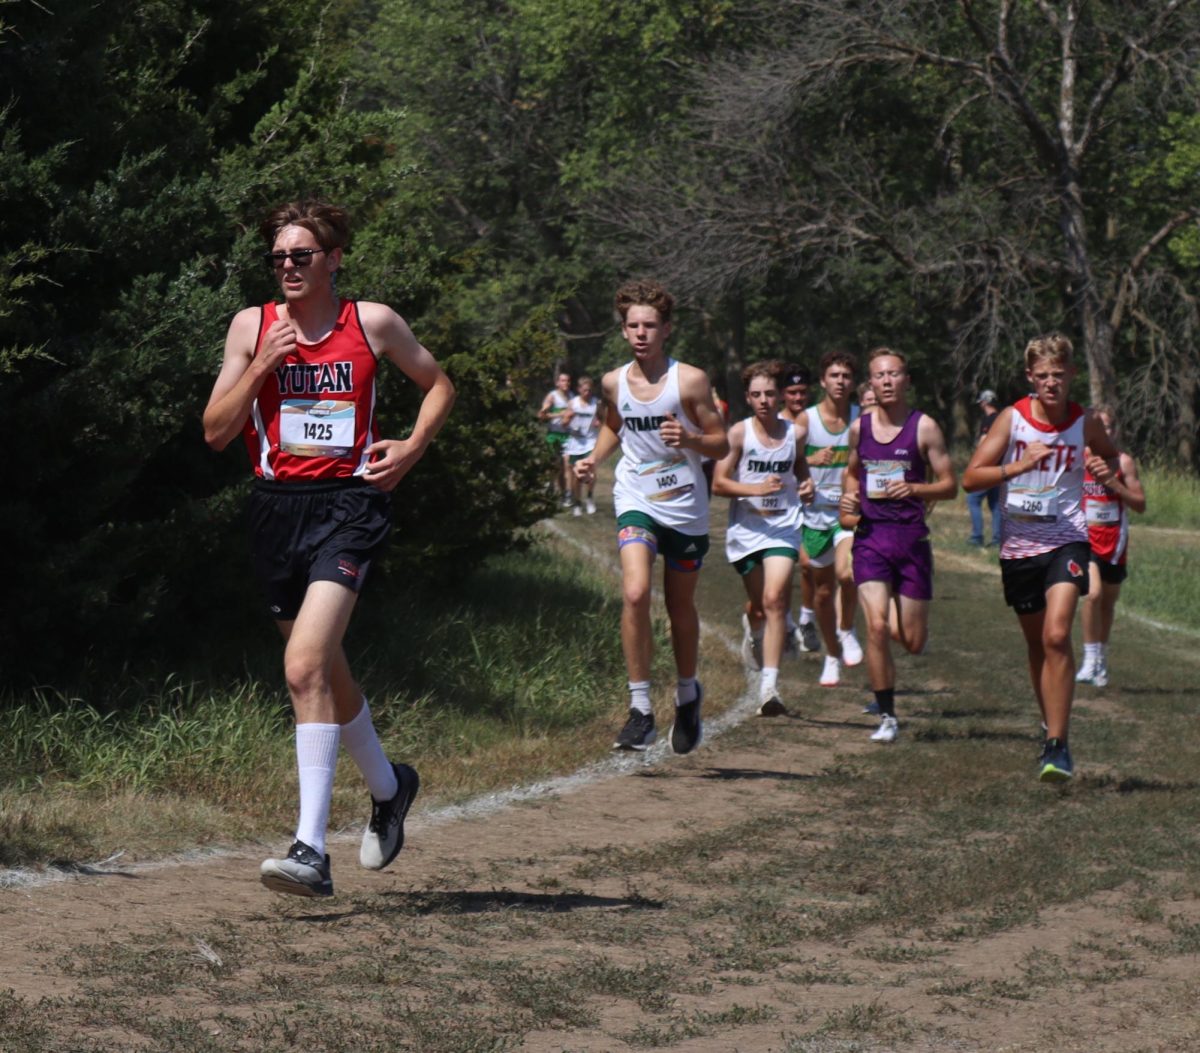 Bryce Kolc running in the front of the pack at Platte River Rumble. Kolc doesnt plan on running for college, but wants to try running marathons in college.